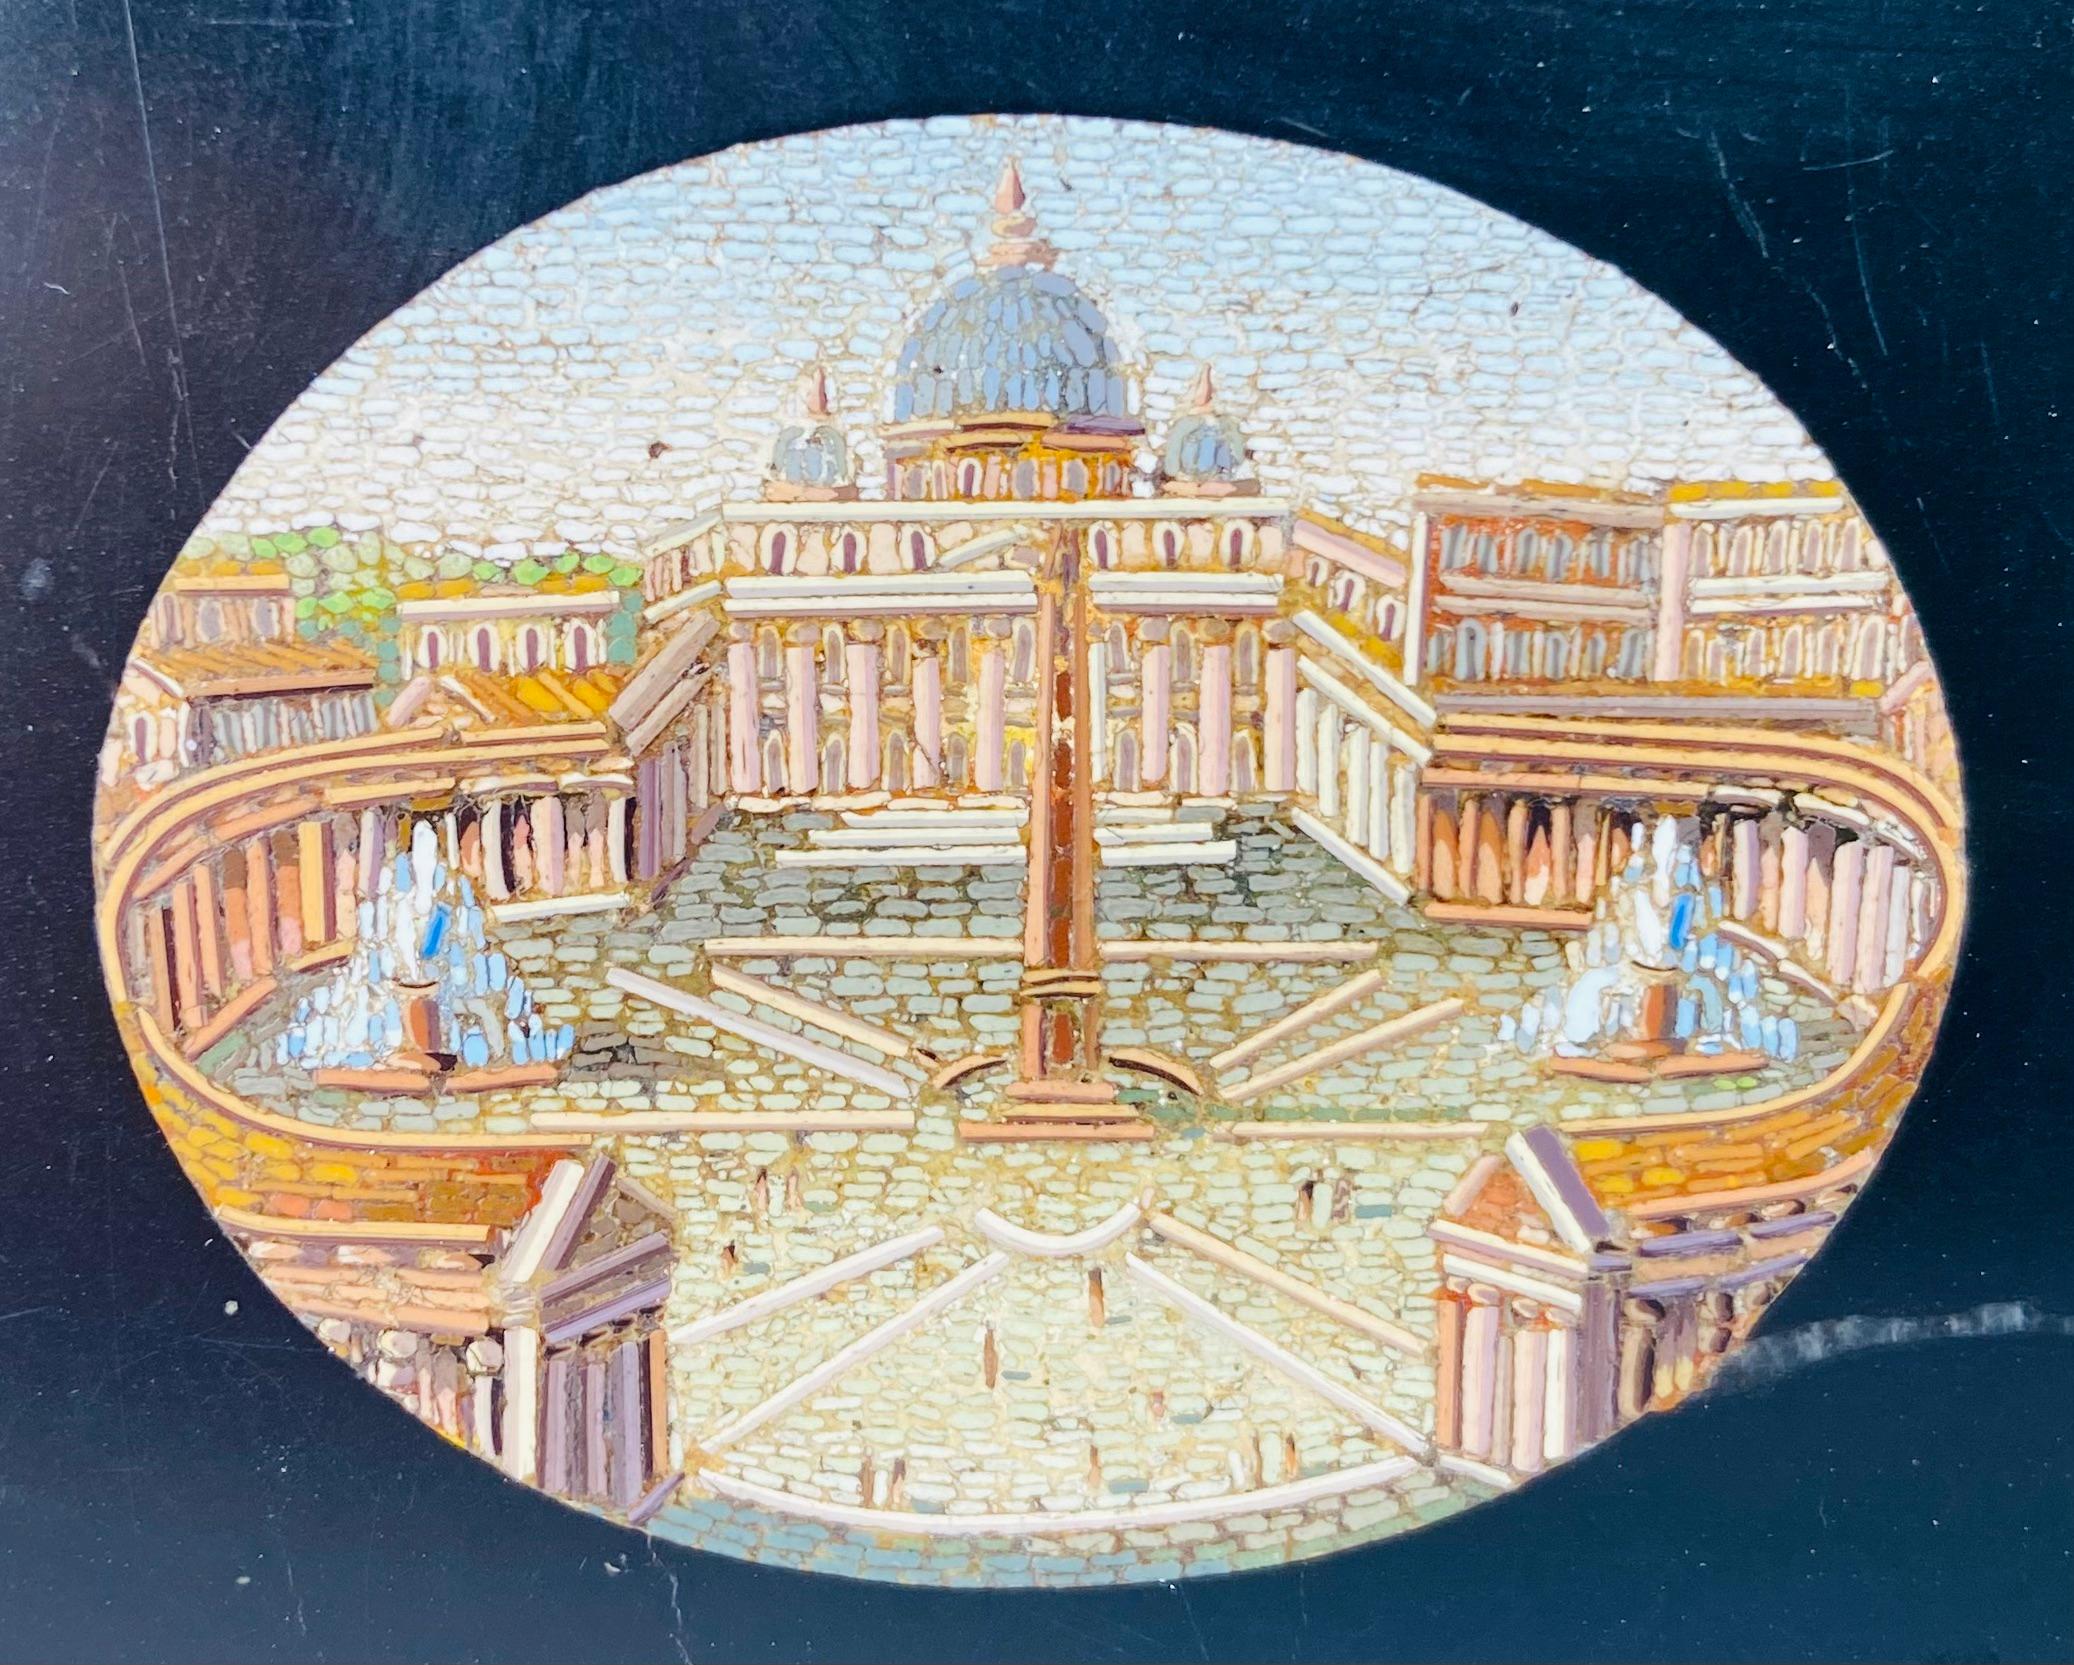 A fine mid-19th century serpentine grand tour micro mosaic tablet or paperweight of the iconic St Peter's Vatican, The Colosseum of Rome, The Pantheon, The Ruins of The Roman Forum and The Temple of Vesta set into black marble.
During a gentleman's